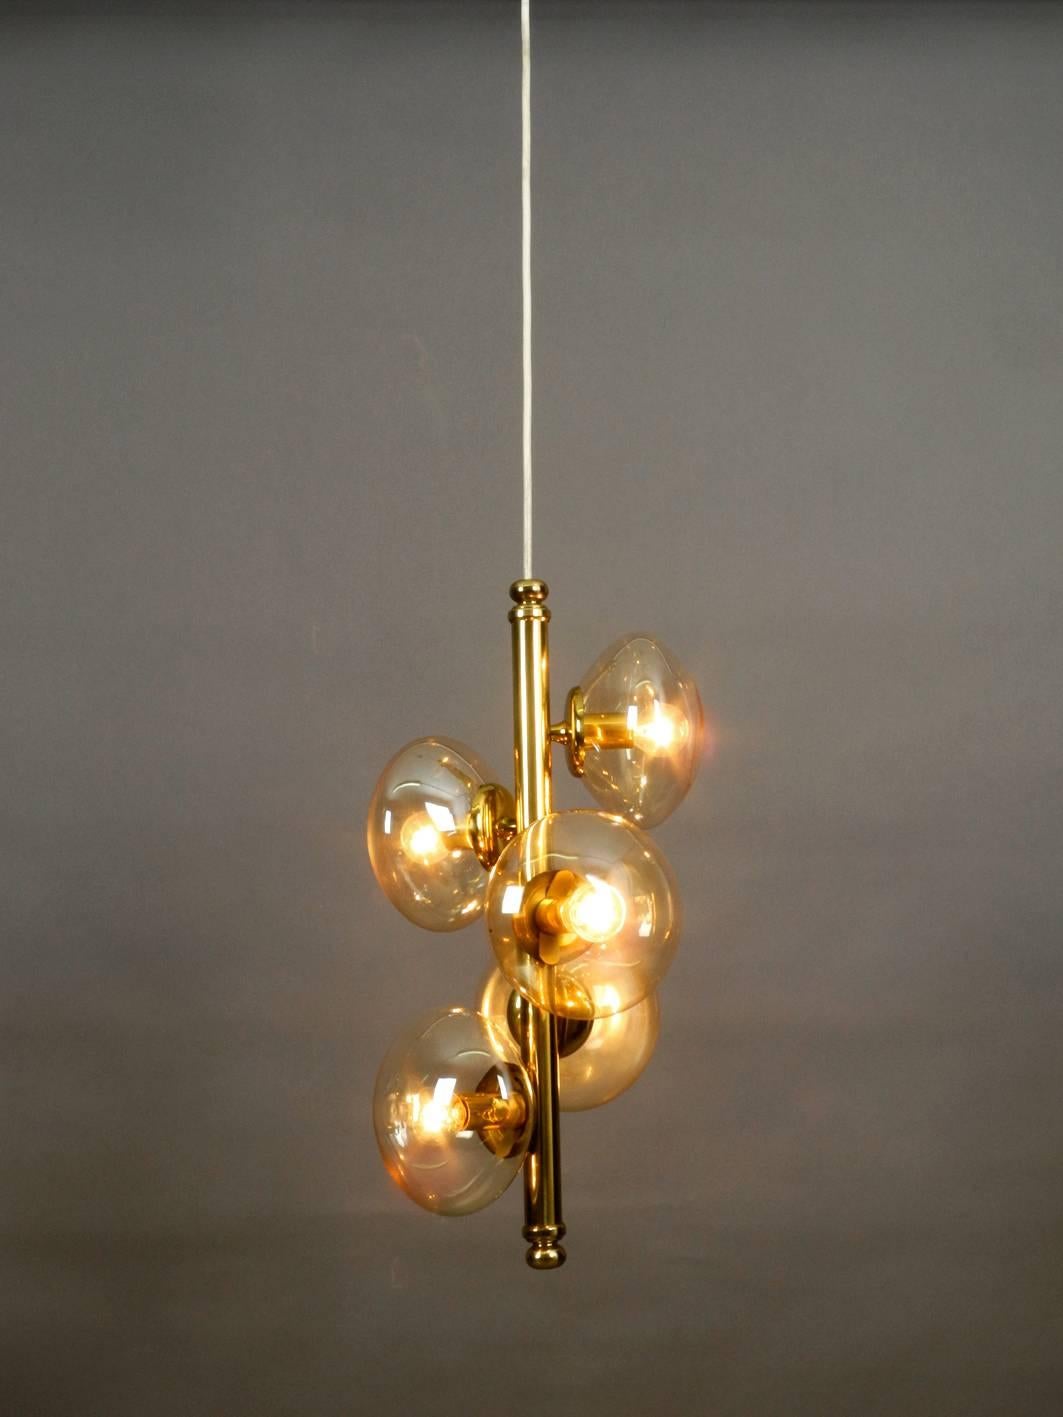 Beautiful 1960s Doria brass pendant lamp with five gold tinted bubble glass shades. Great Minimalist design for a very elegant and pleasant lighting.
Rod is made of brass. With a long cable. Glasses in are shimmer in brass gold color.
Very good